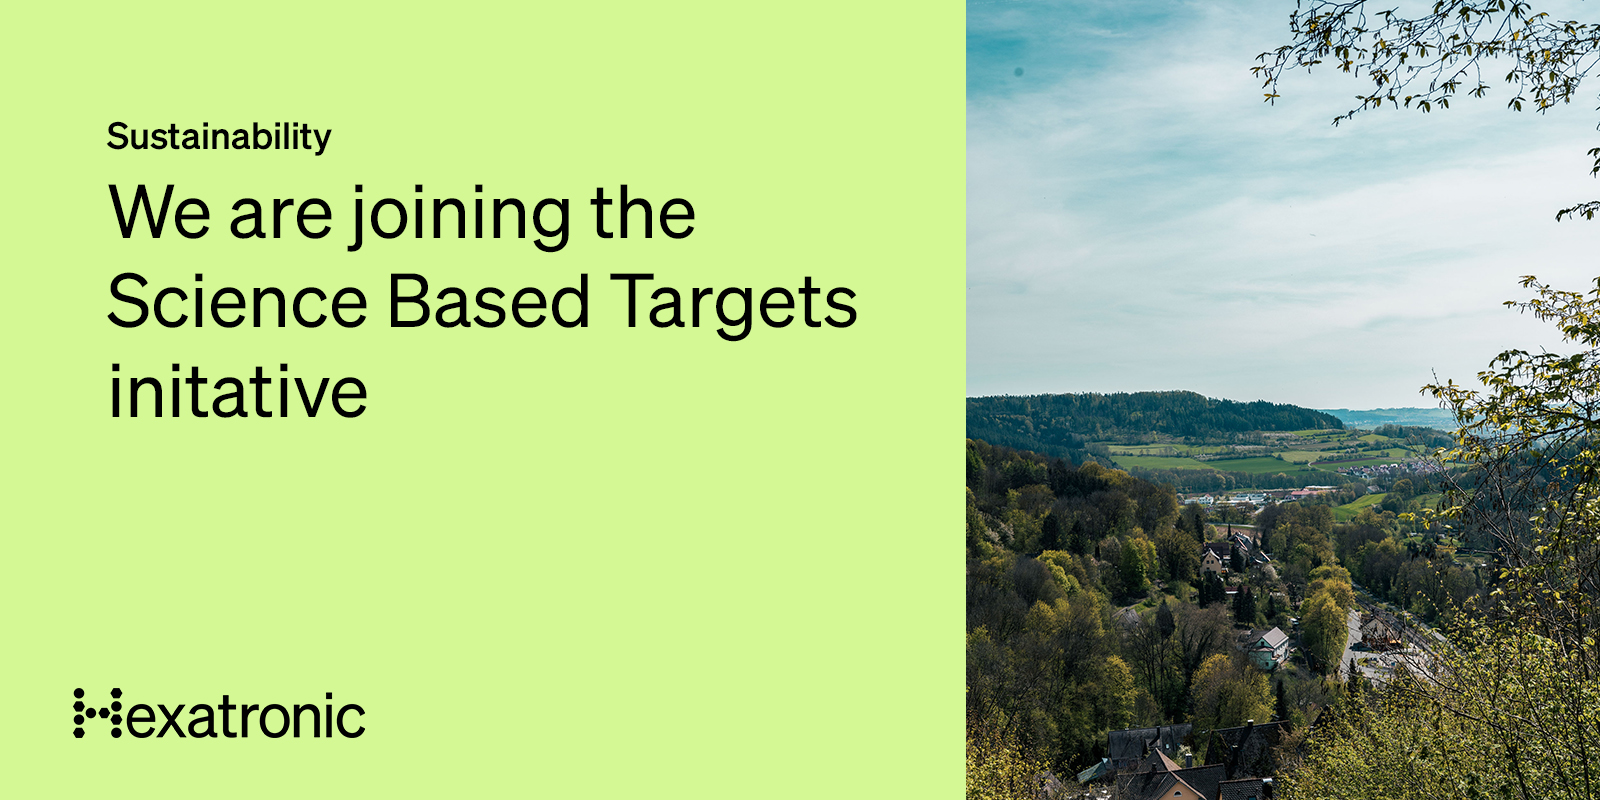 Hexatronic Group is joining the Science Based Targets initative